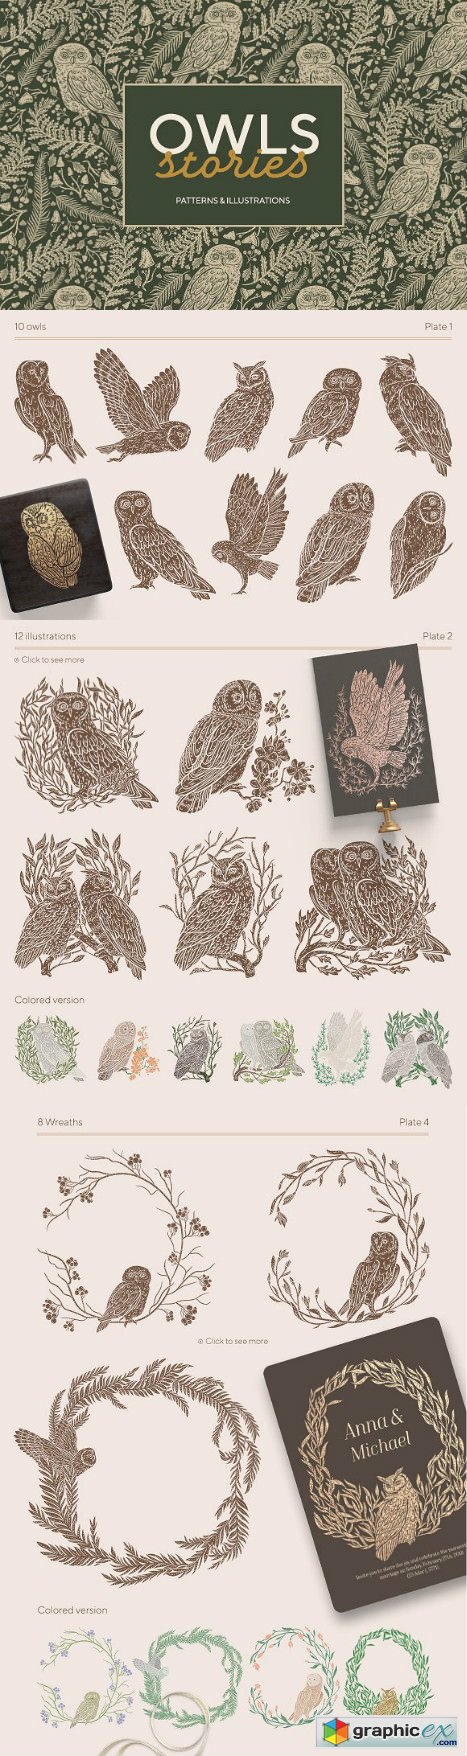 Owls graphic collection